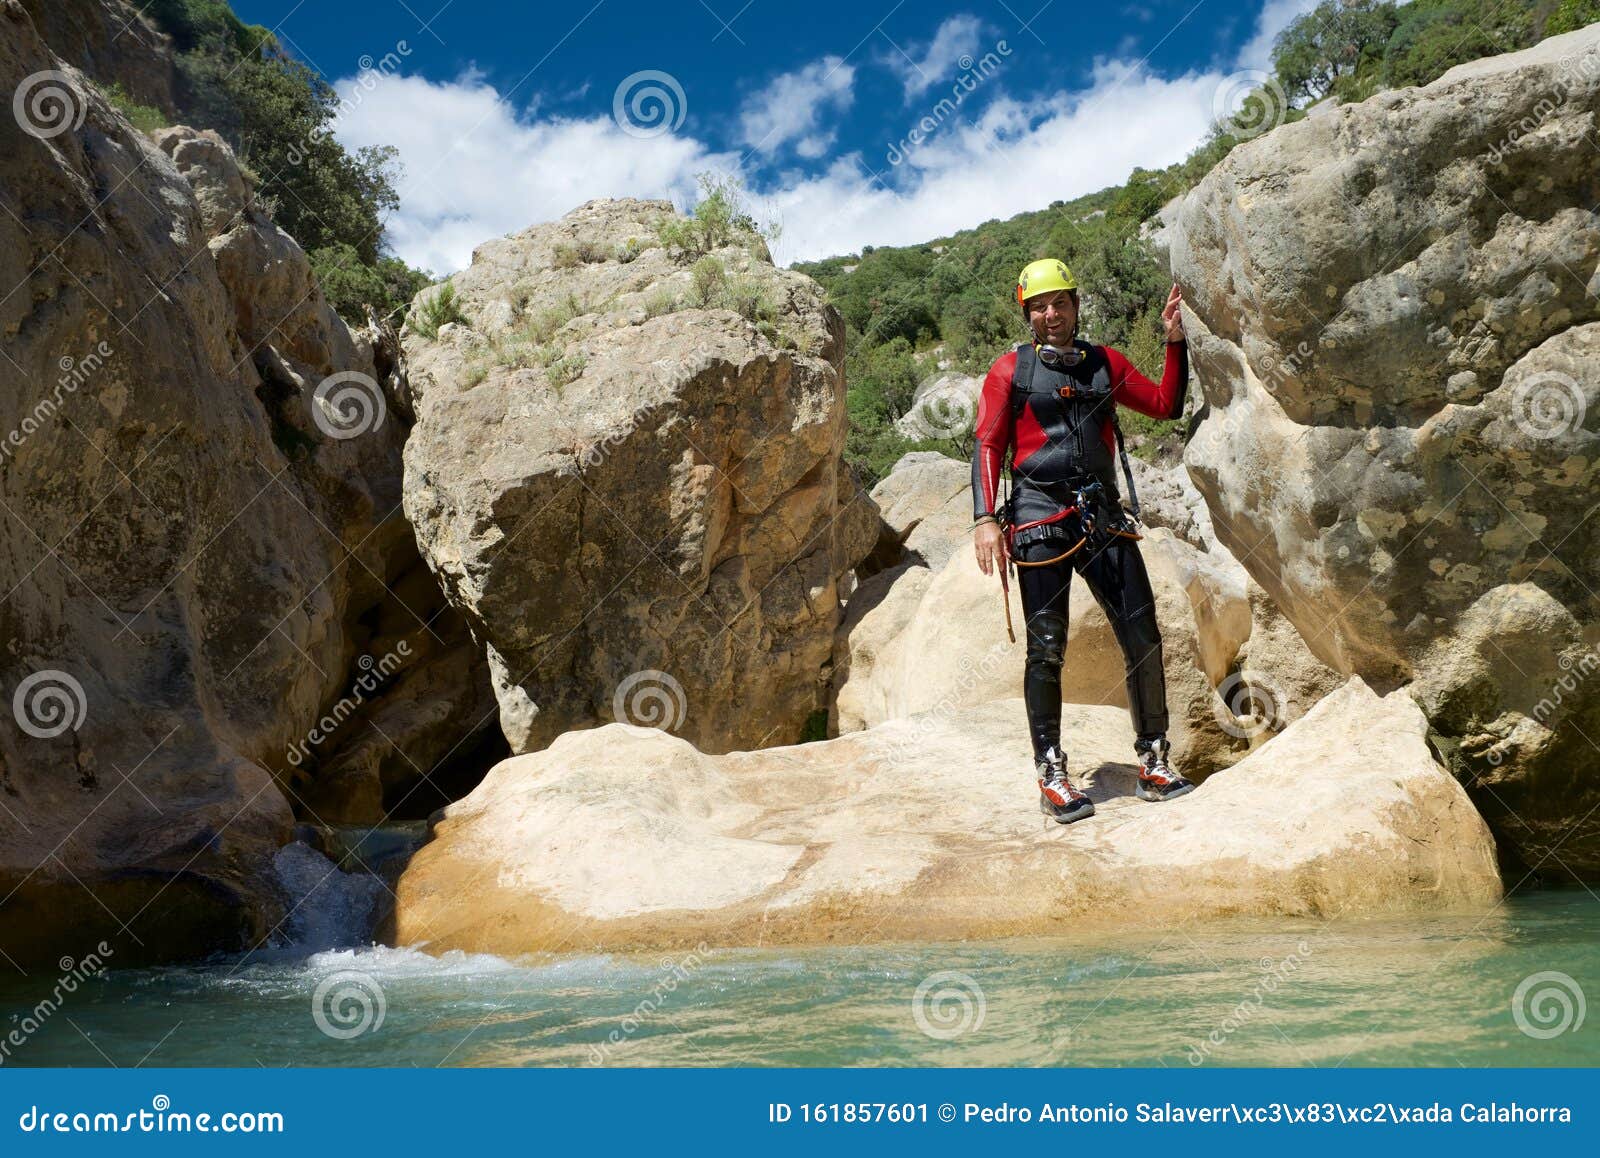 canyoning in spain